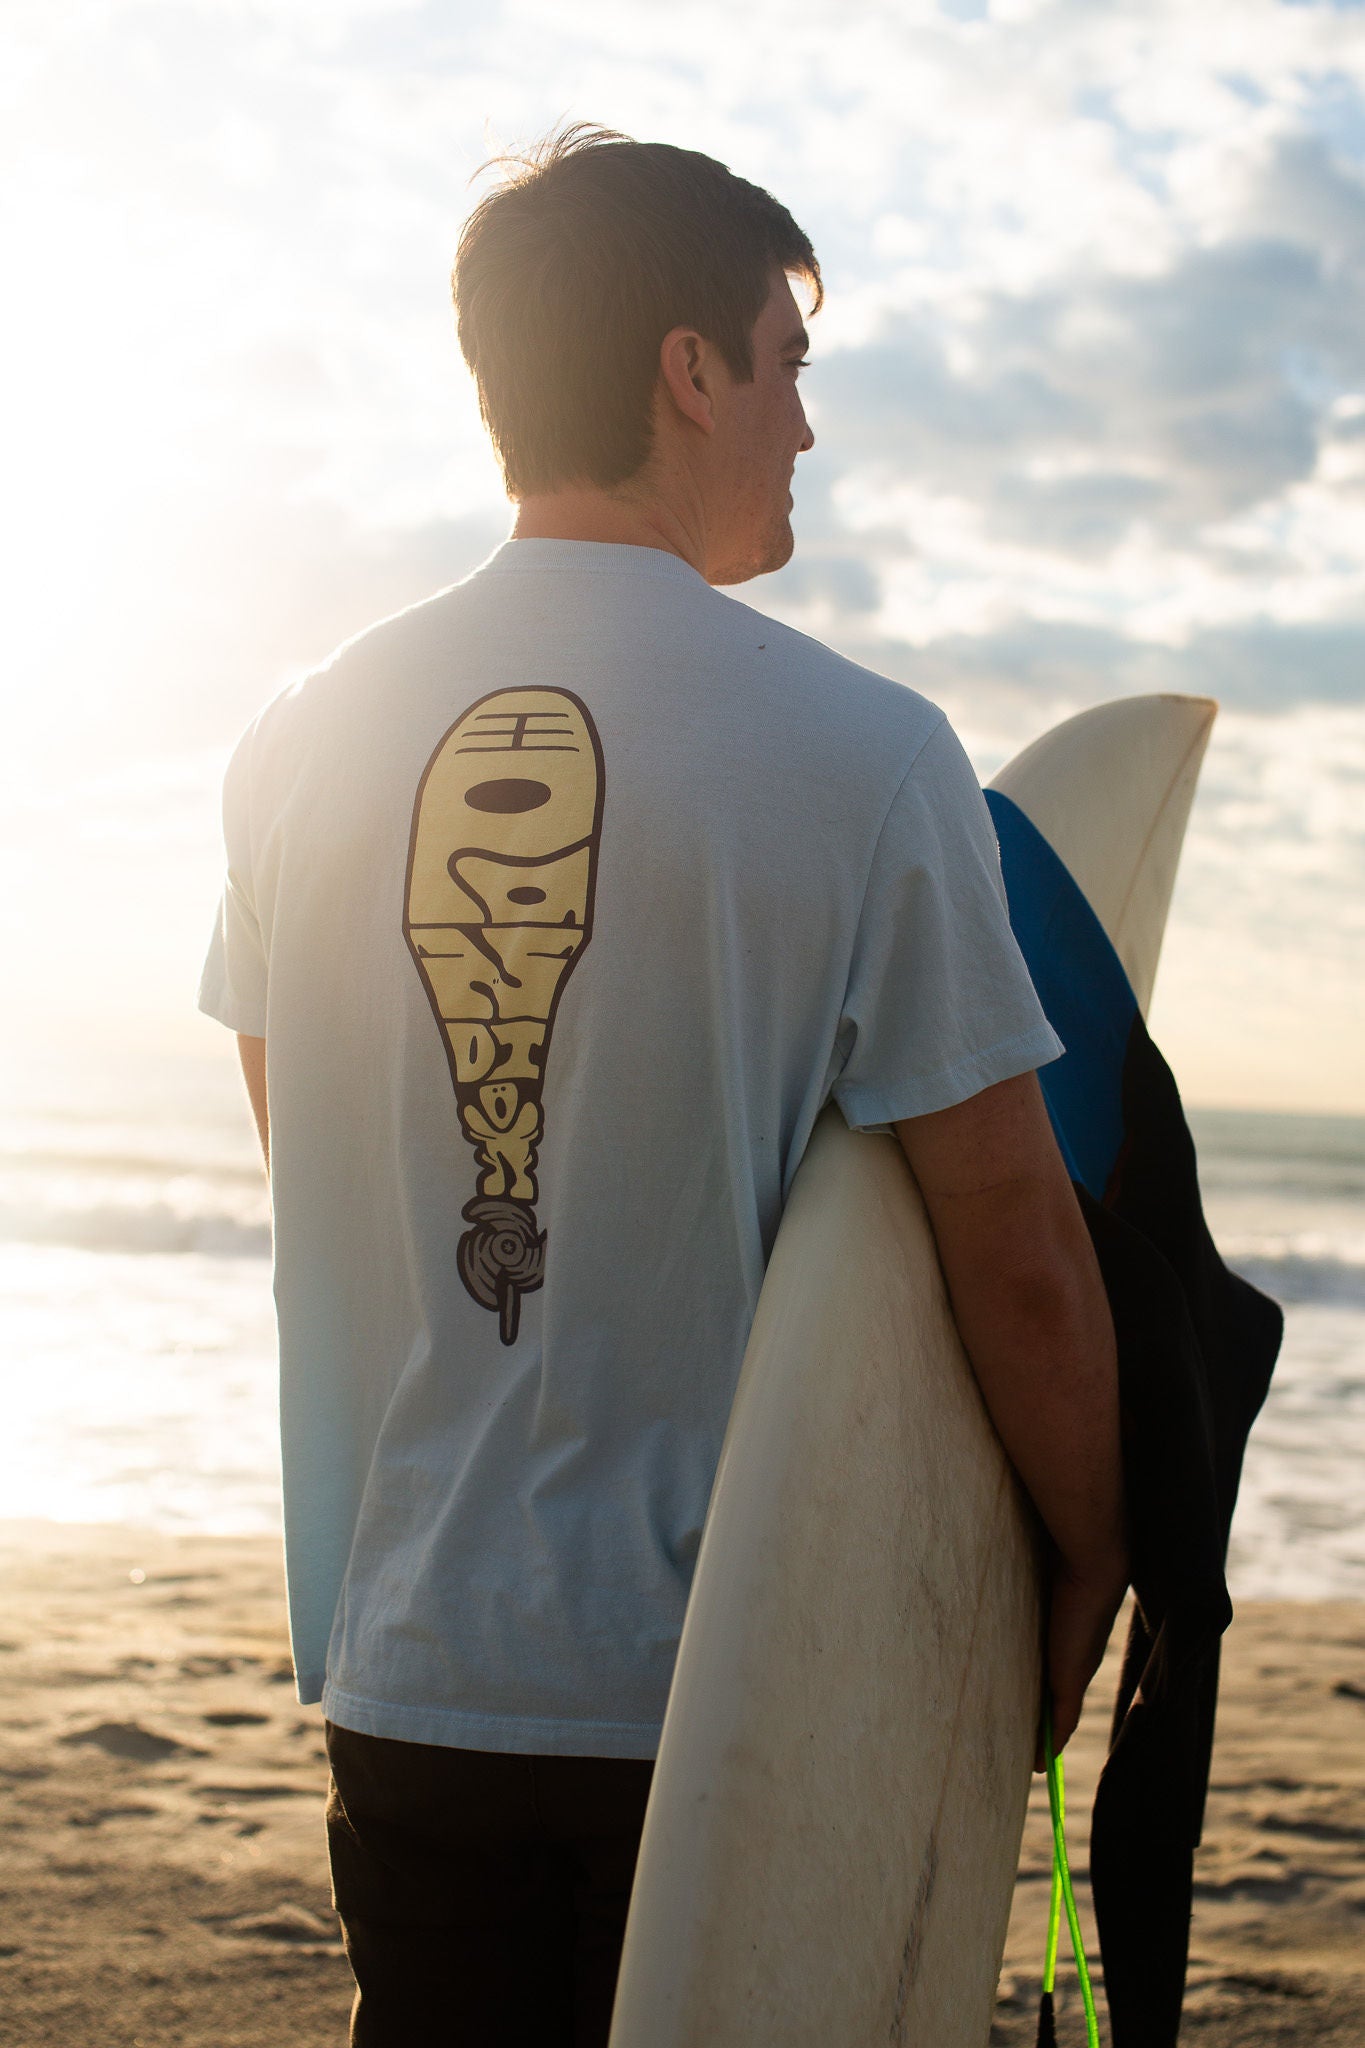 outboard light blue tee shirt on man carrying a surfboard on the beach